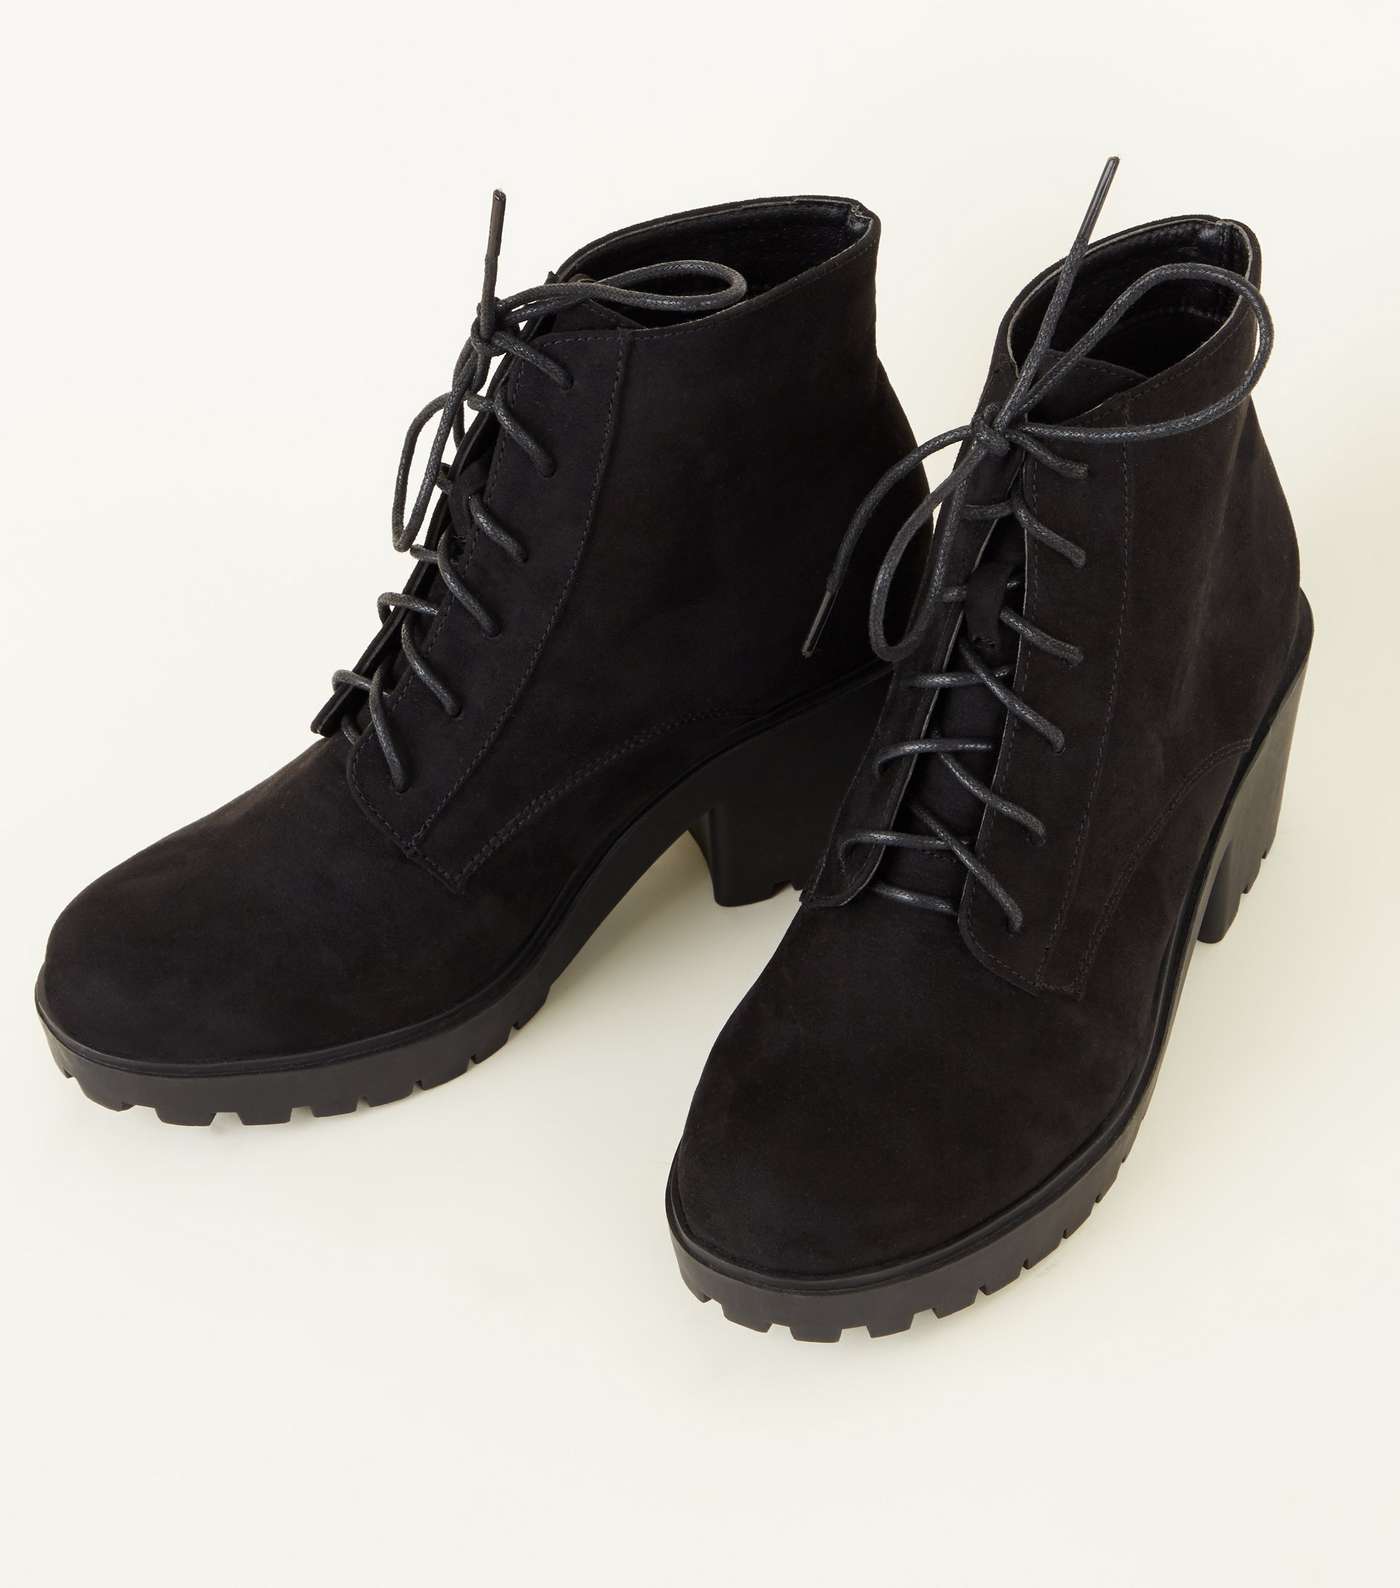 Girls Black Suedette Chunky Heel Lace Up Boots Image 4